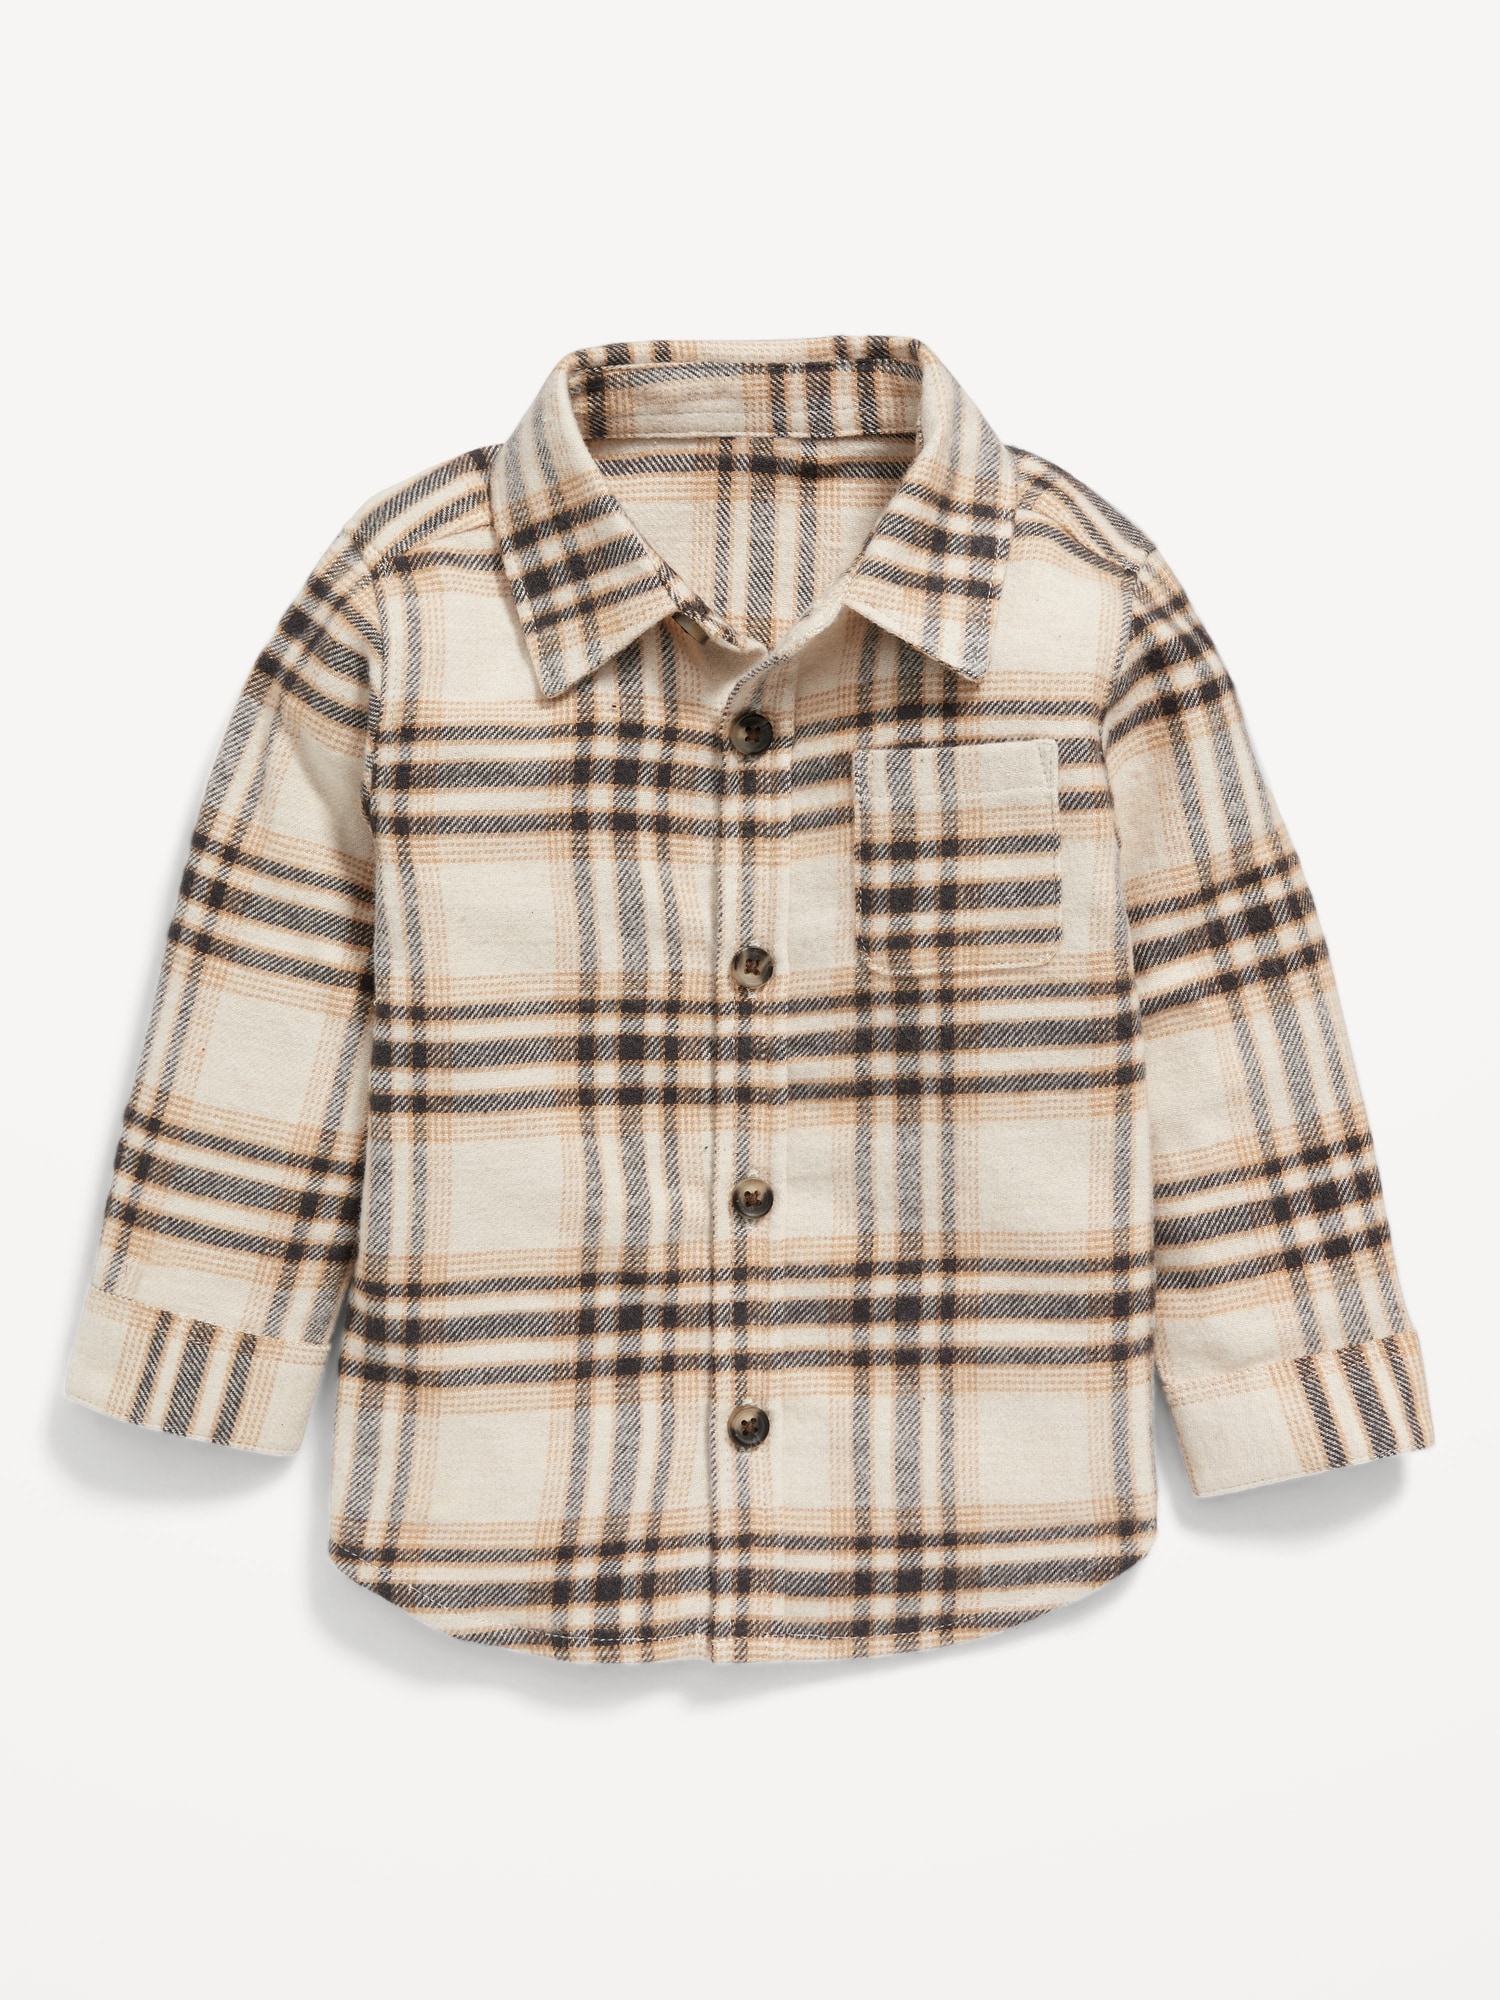 Matching Long-Sleeve Plaid Pocket Shirt for Baby | Old Navy